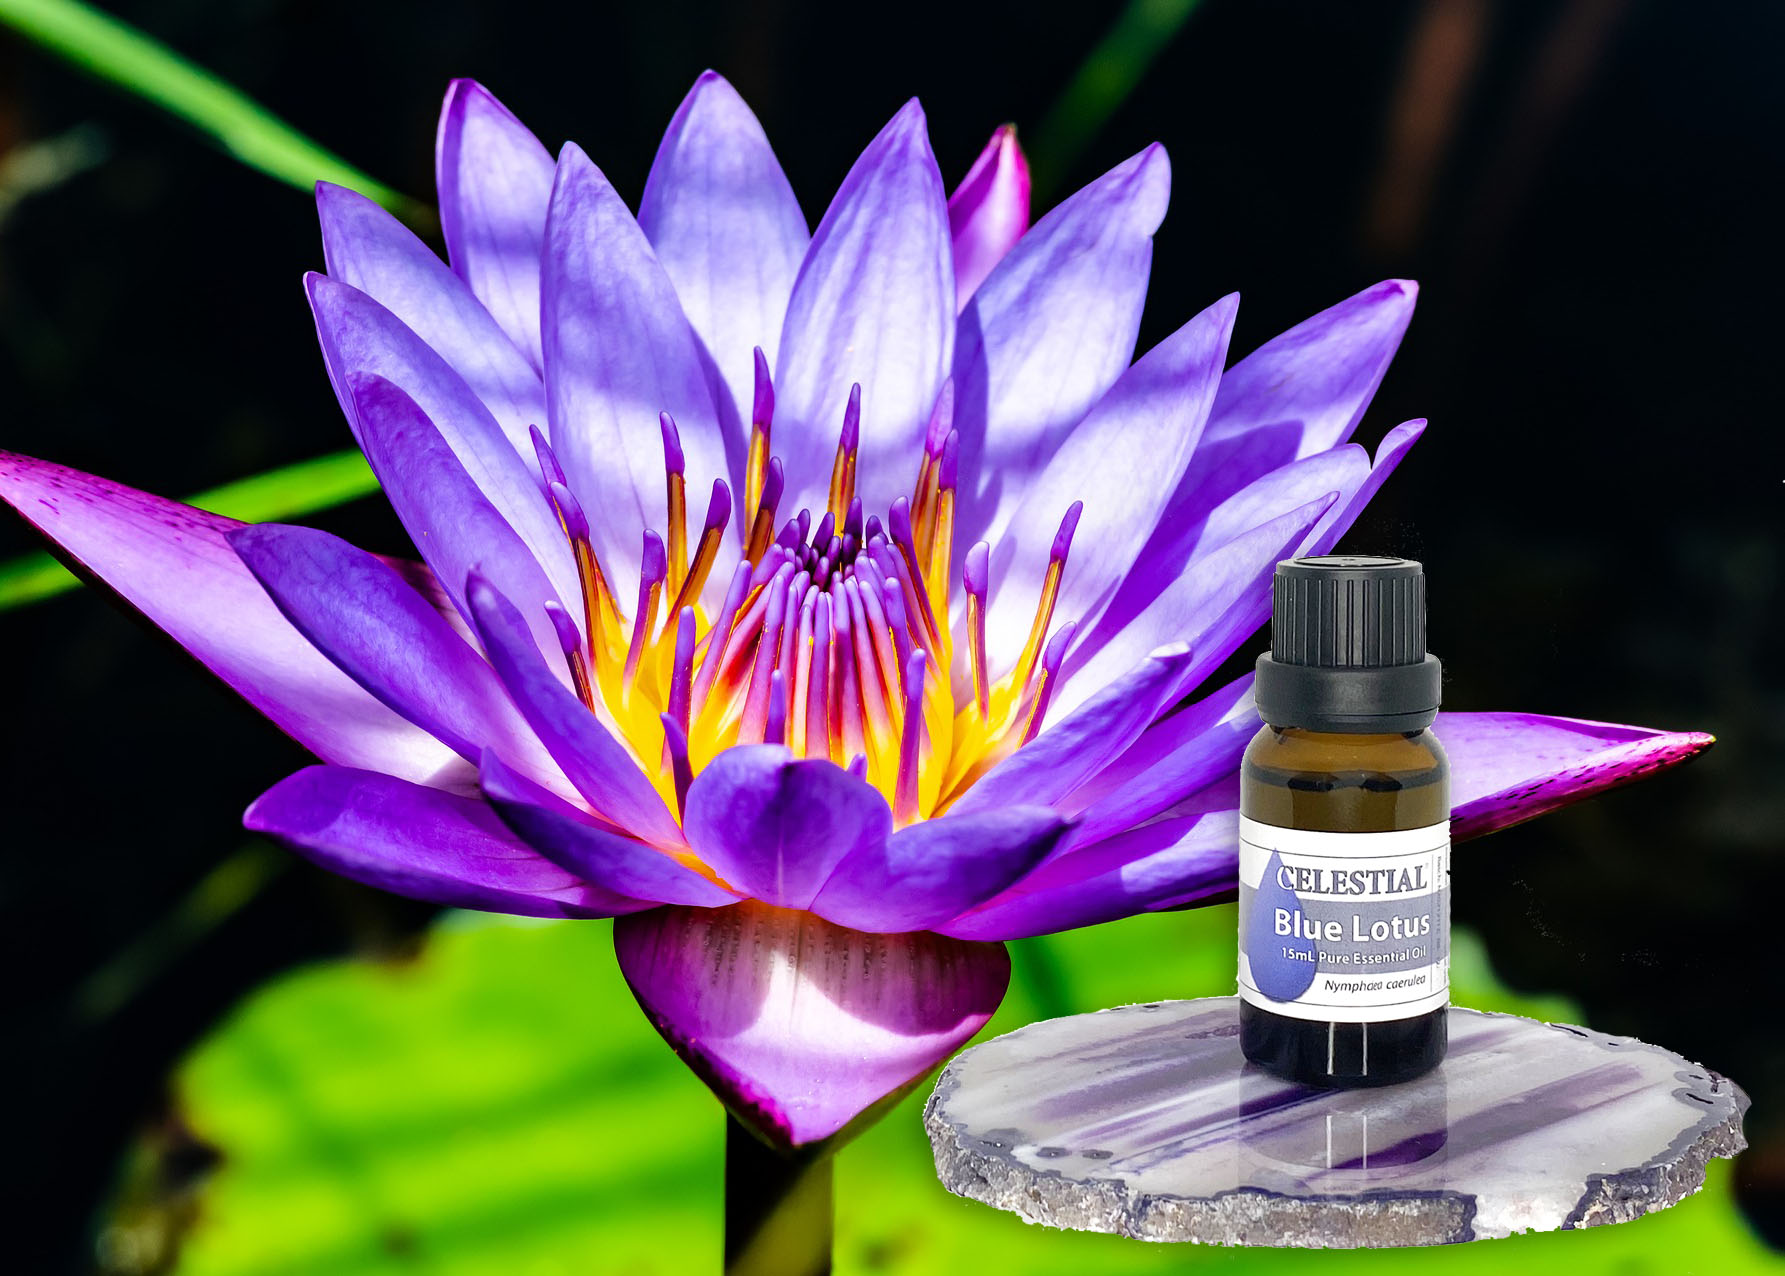 What Are The Benefits of Blue Lotus Absolute Essential Oil? - My Herb Clinic